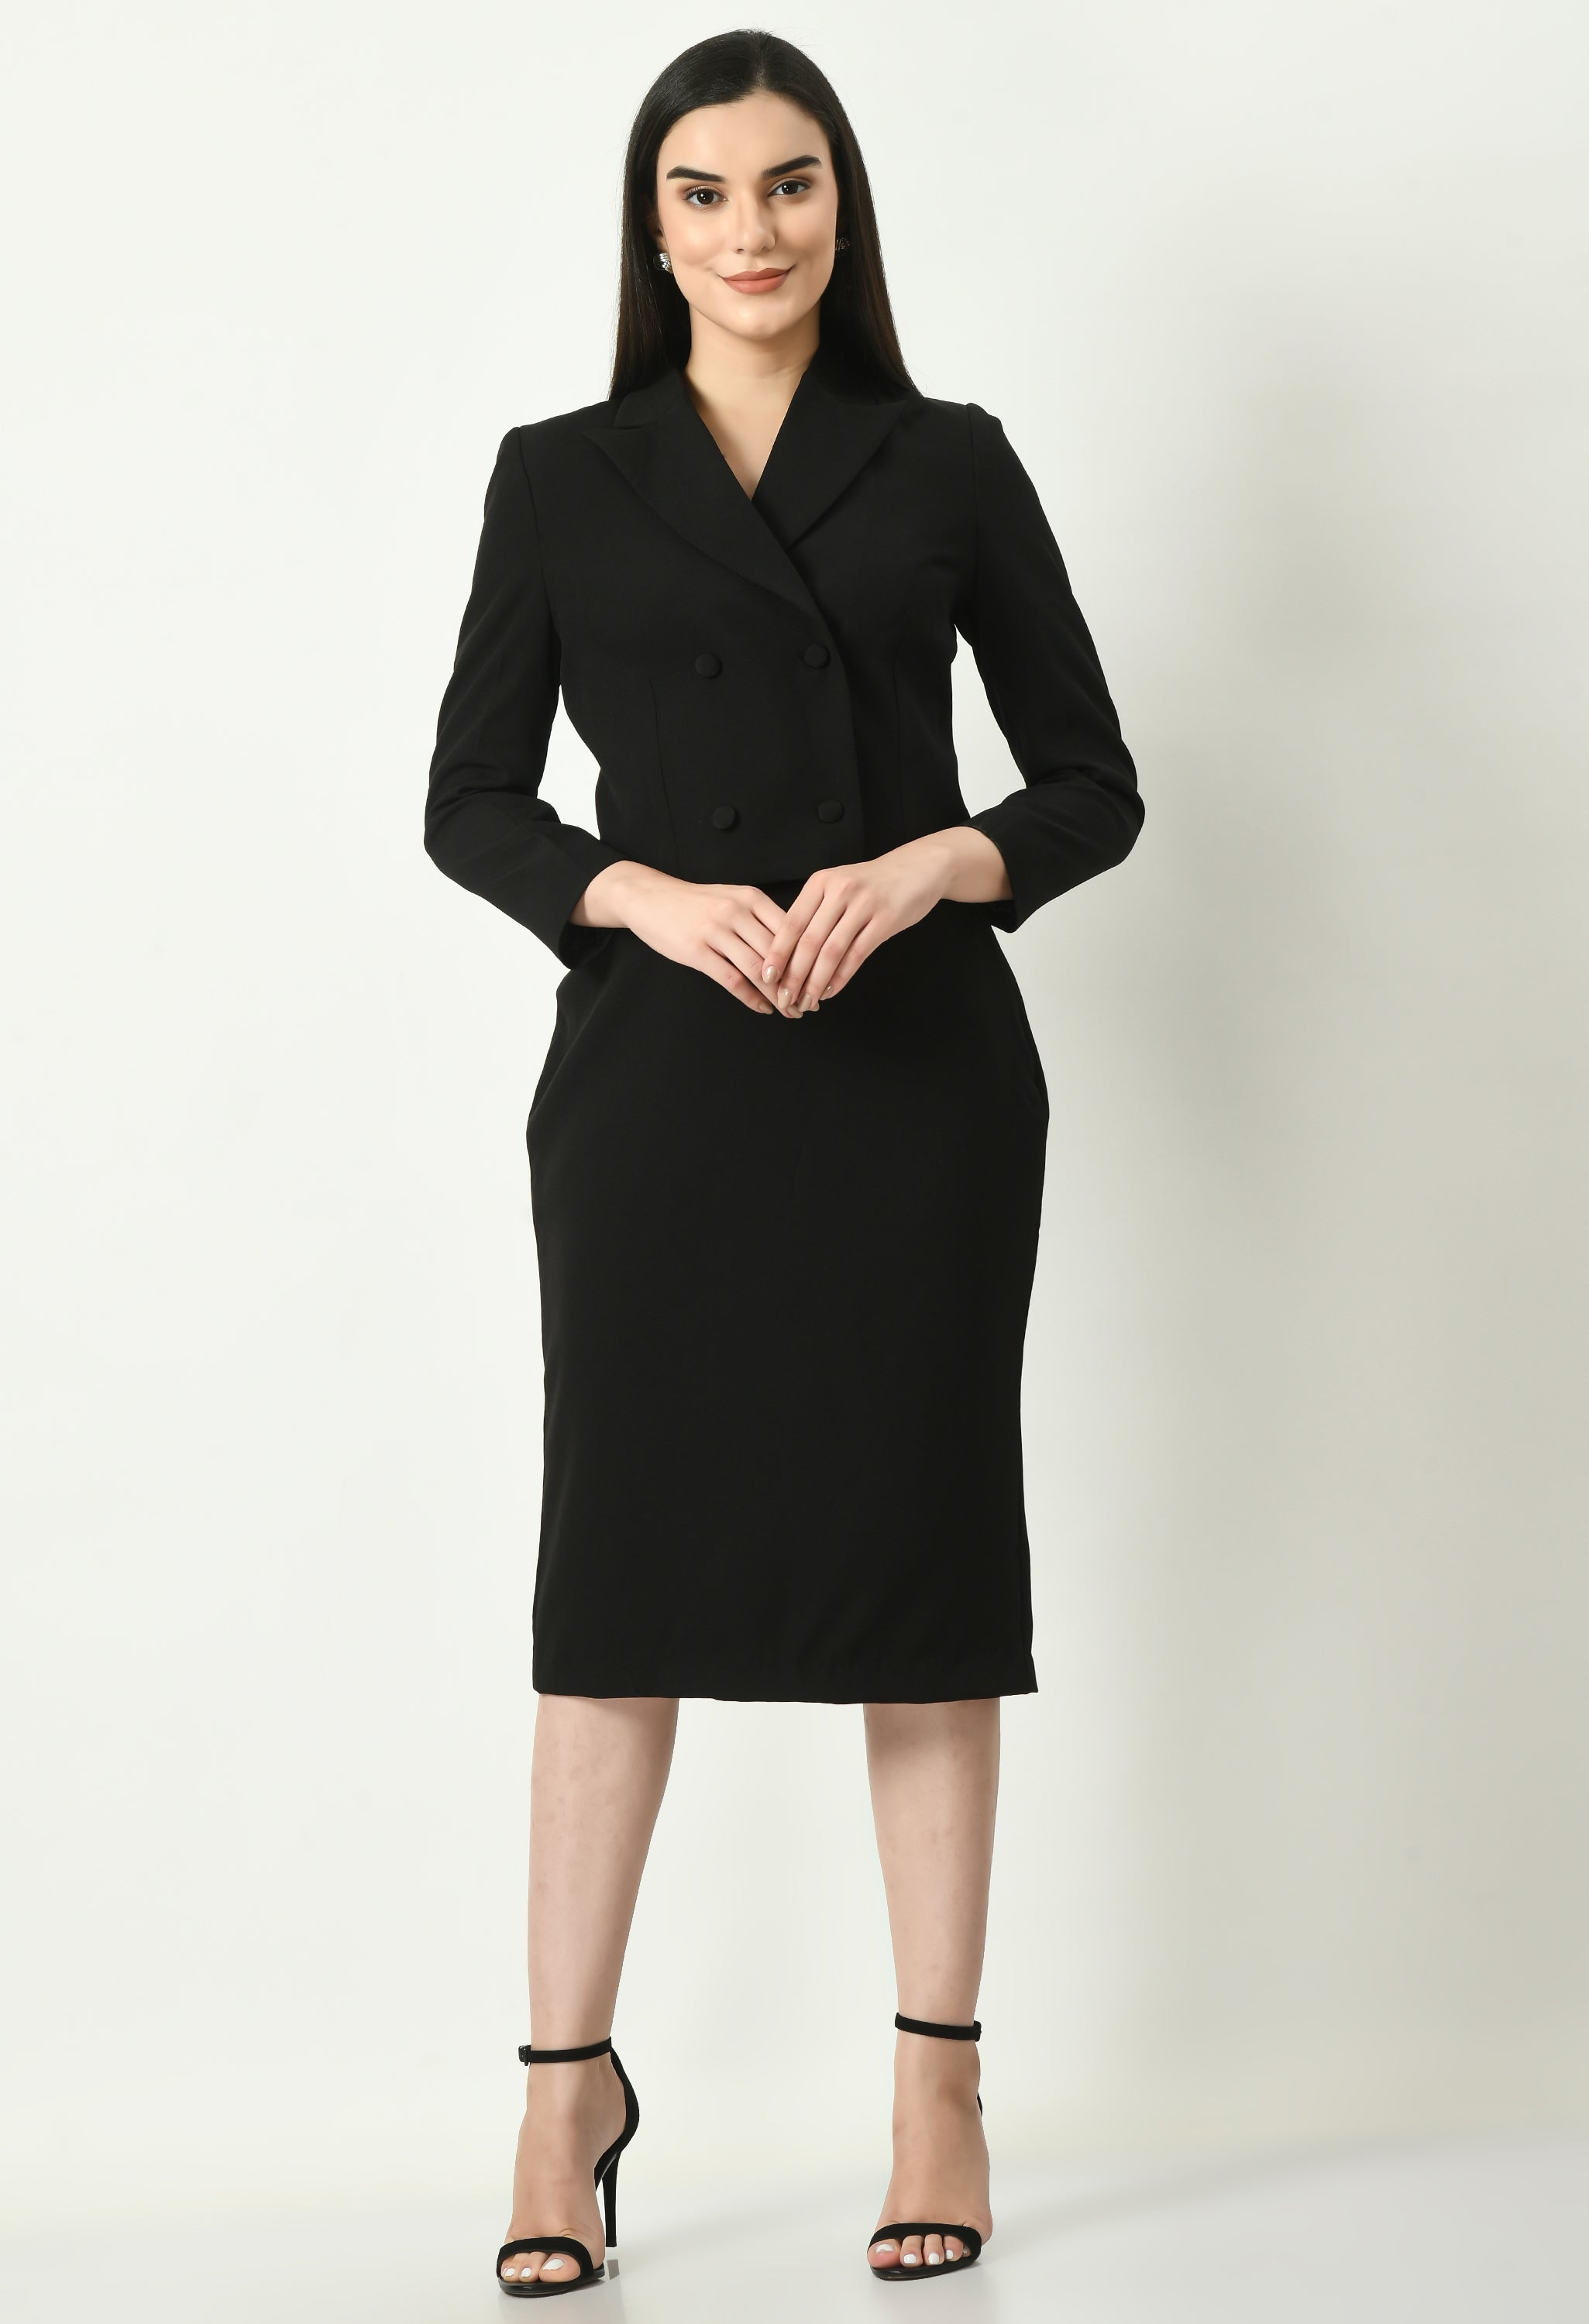 Plus Size Pencil Skirt Office Bodycon Dresses for Women in Lekki -  Clothing, Dales Store Ng | Jiji.ng